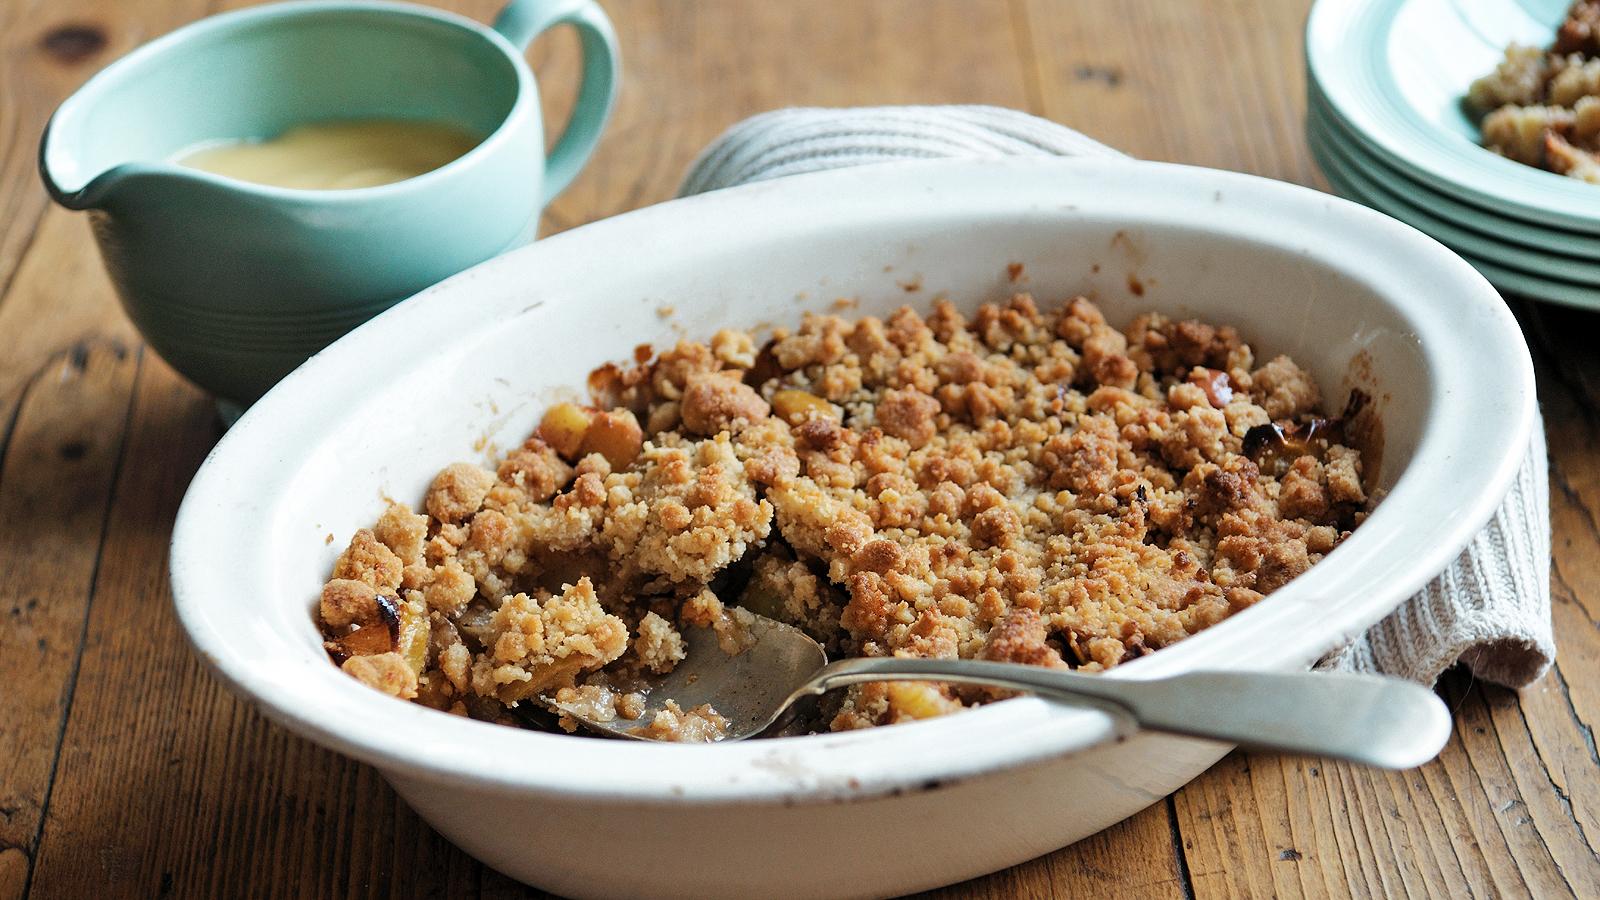 Millwall Community Trust - How To Make Apple Crumble